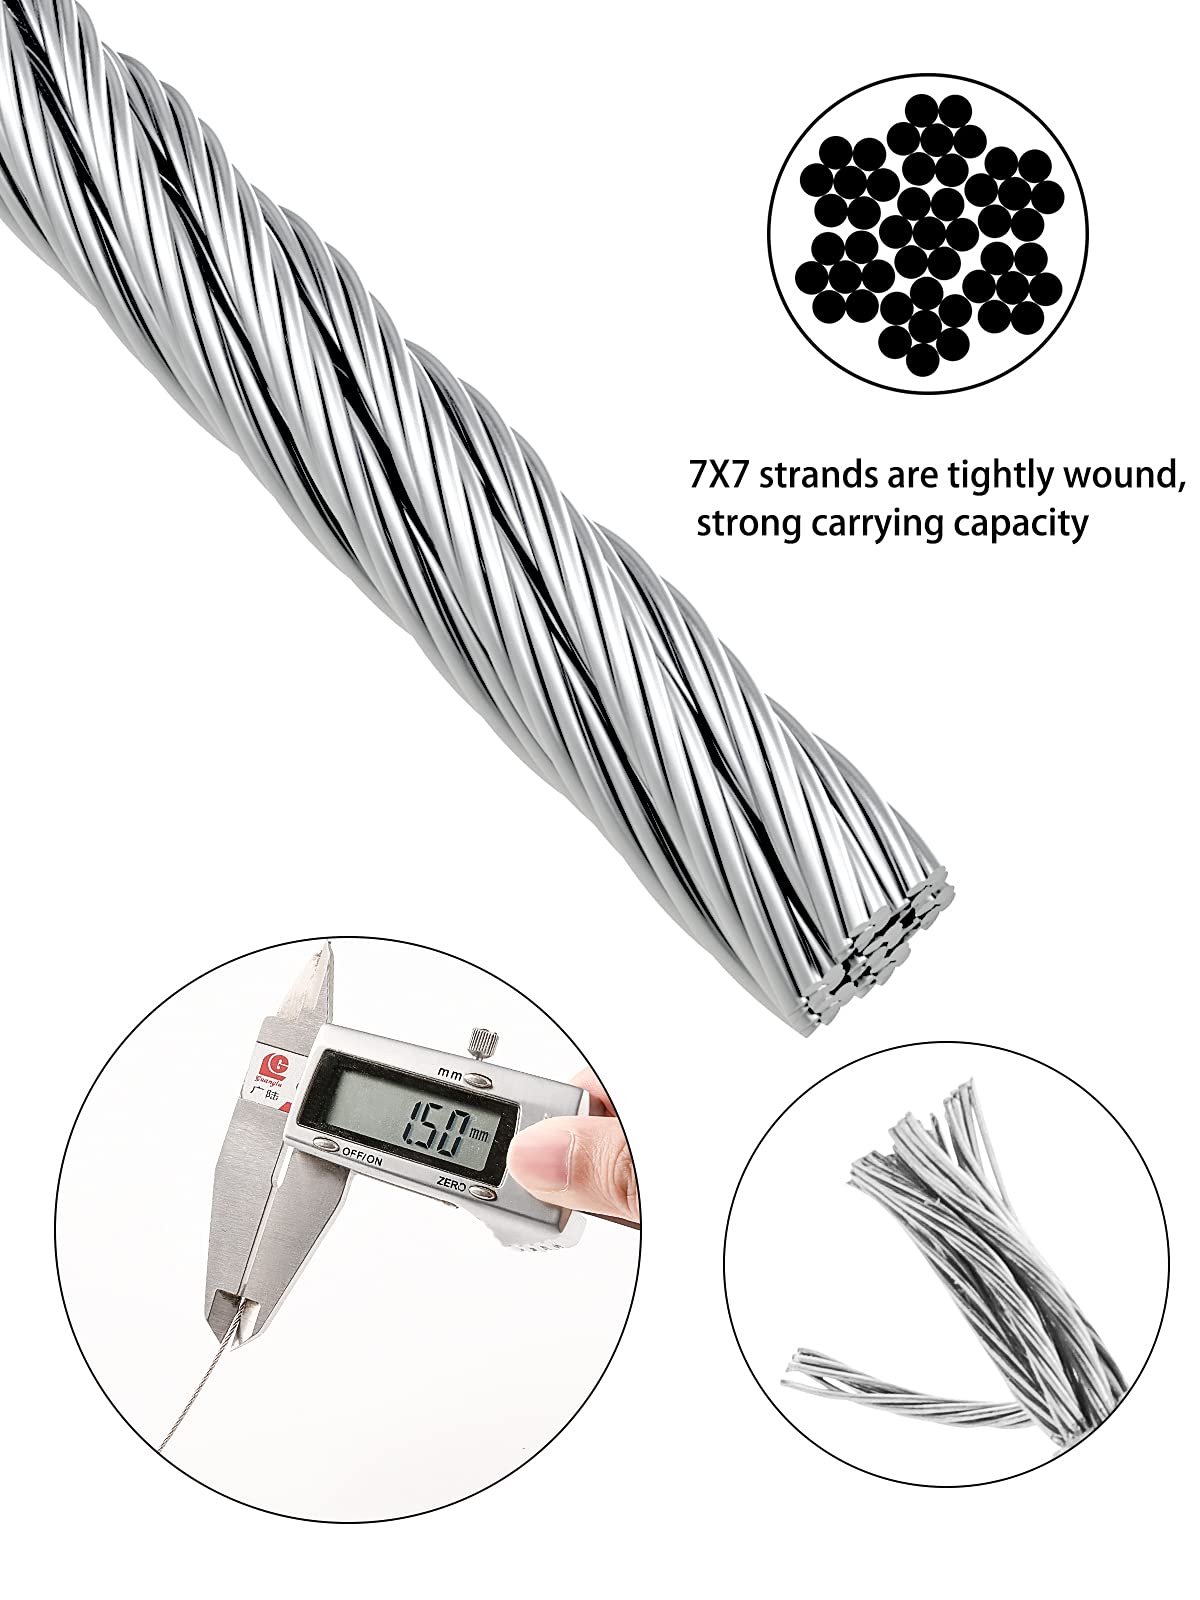 Abimars Wire Rope,30m Stainless Steel Wire Rope Cable Aircraft Cable with Aluminum Crimping Loop, 7x7 Strand Core for Plants Climbing, Flower Hanging, Crafts DIY